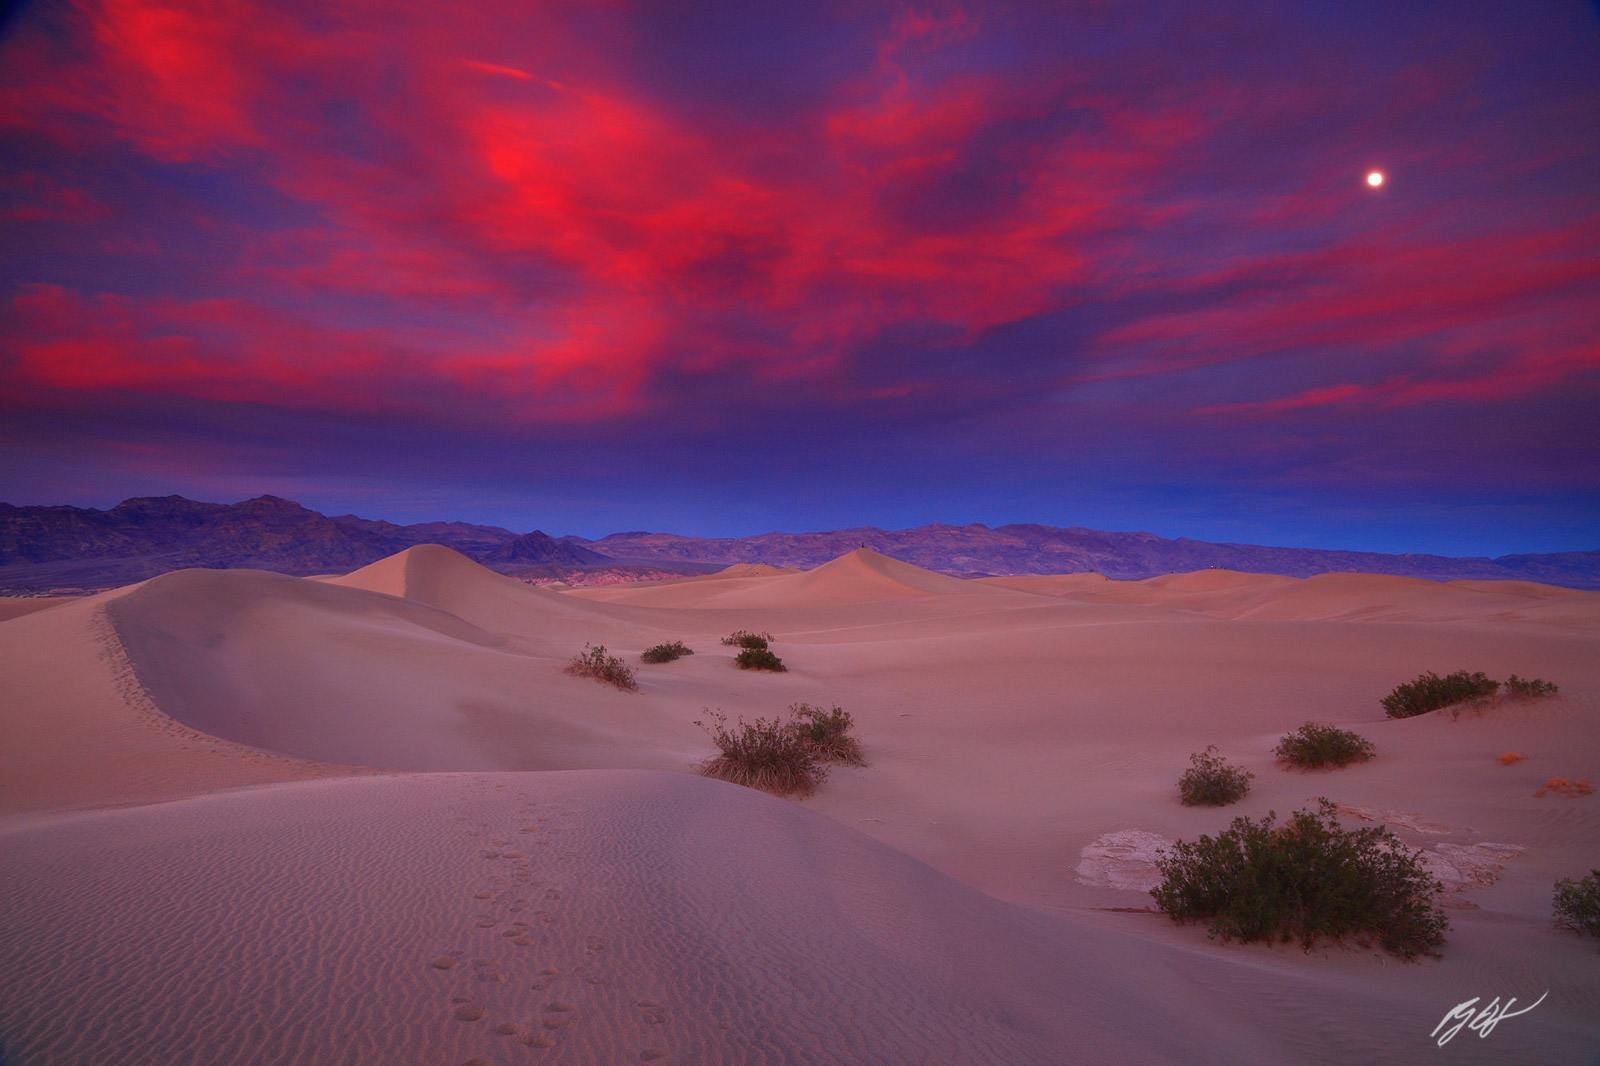 Sunset and Moon over the Mesquite Sand Dunes in Death Valley National Park in California